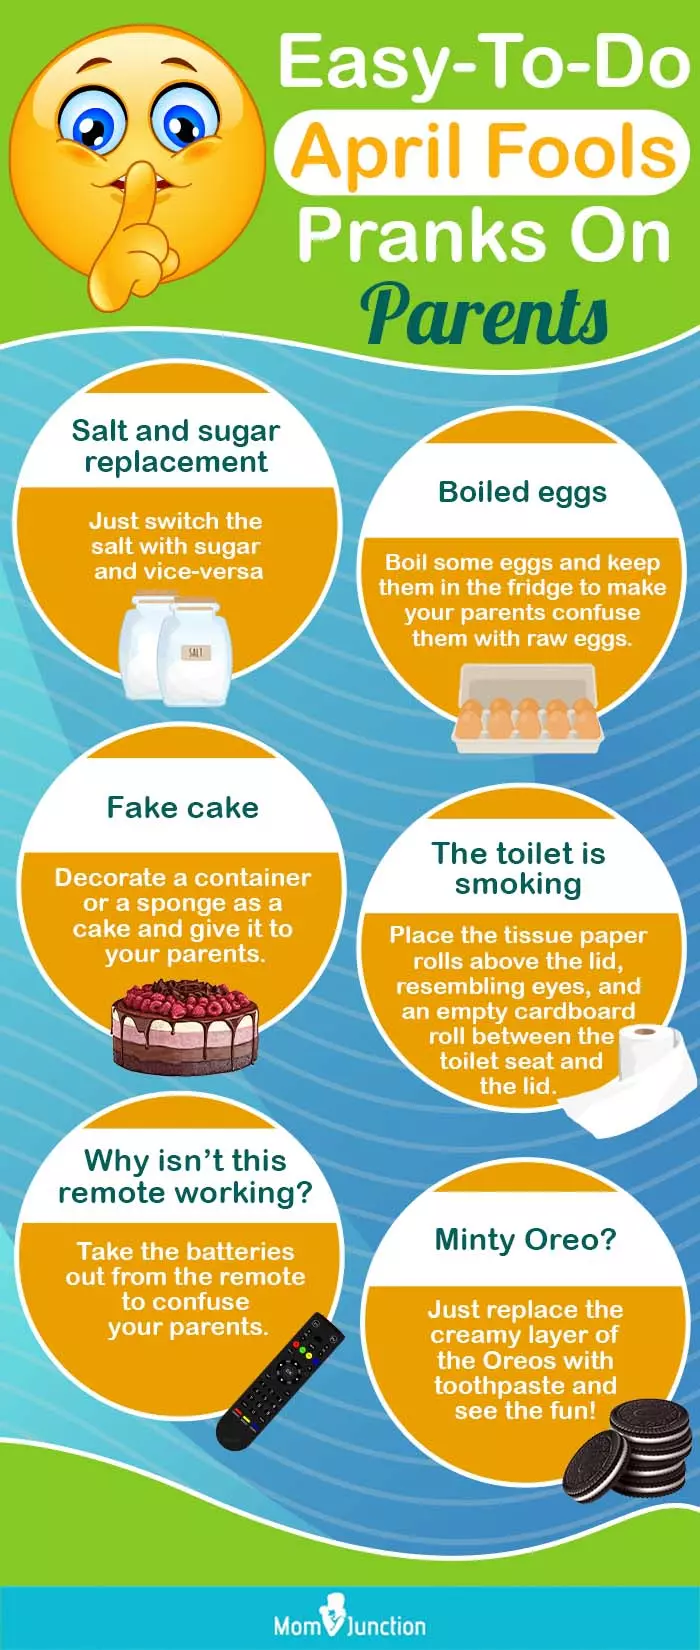 easy-to-do april fools pranks on parents (infographic)